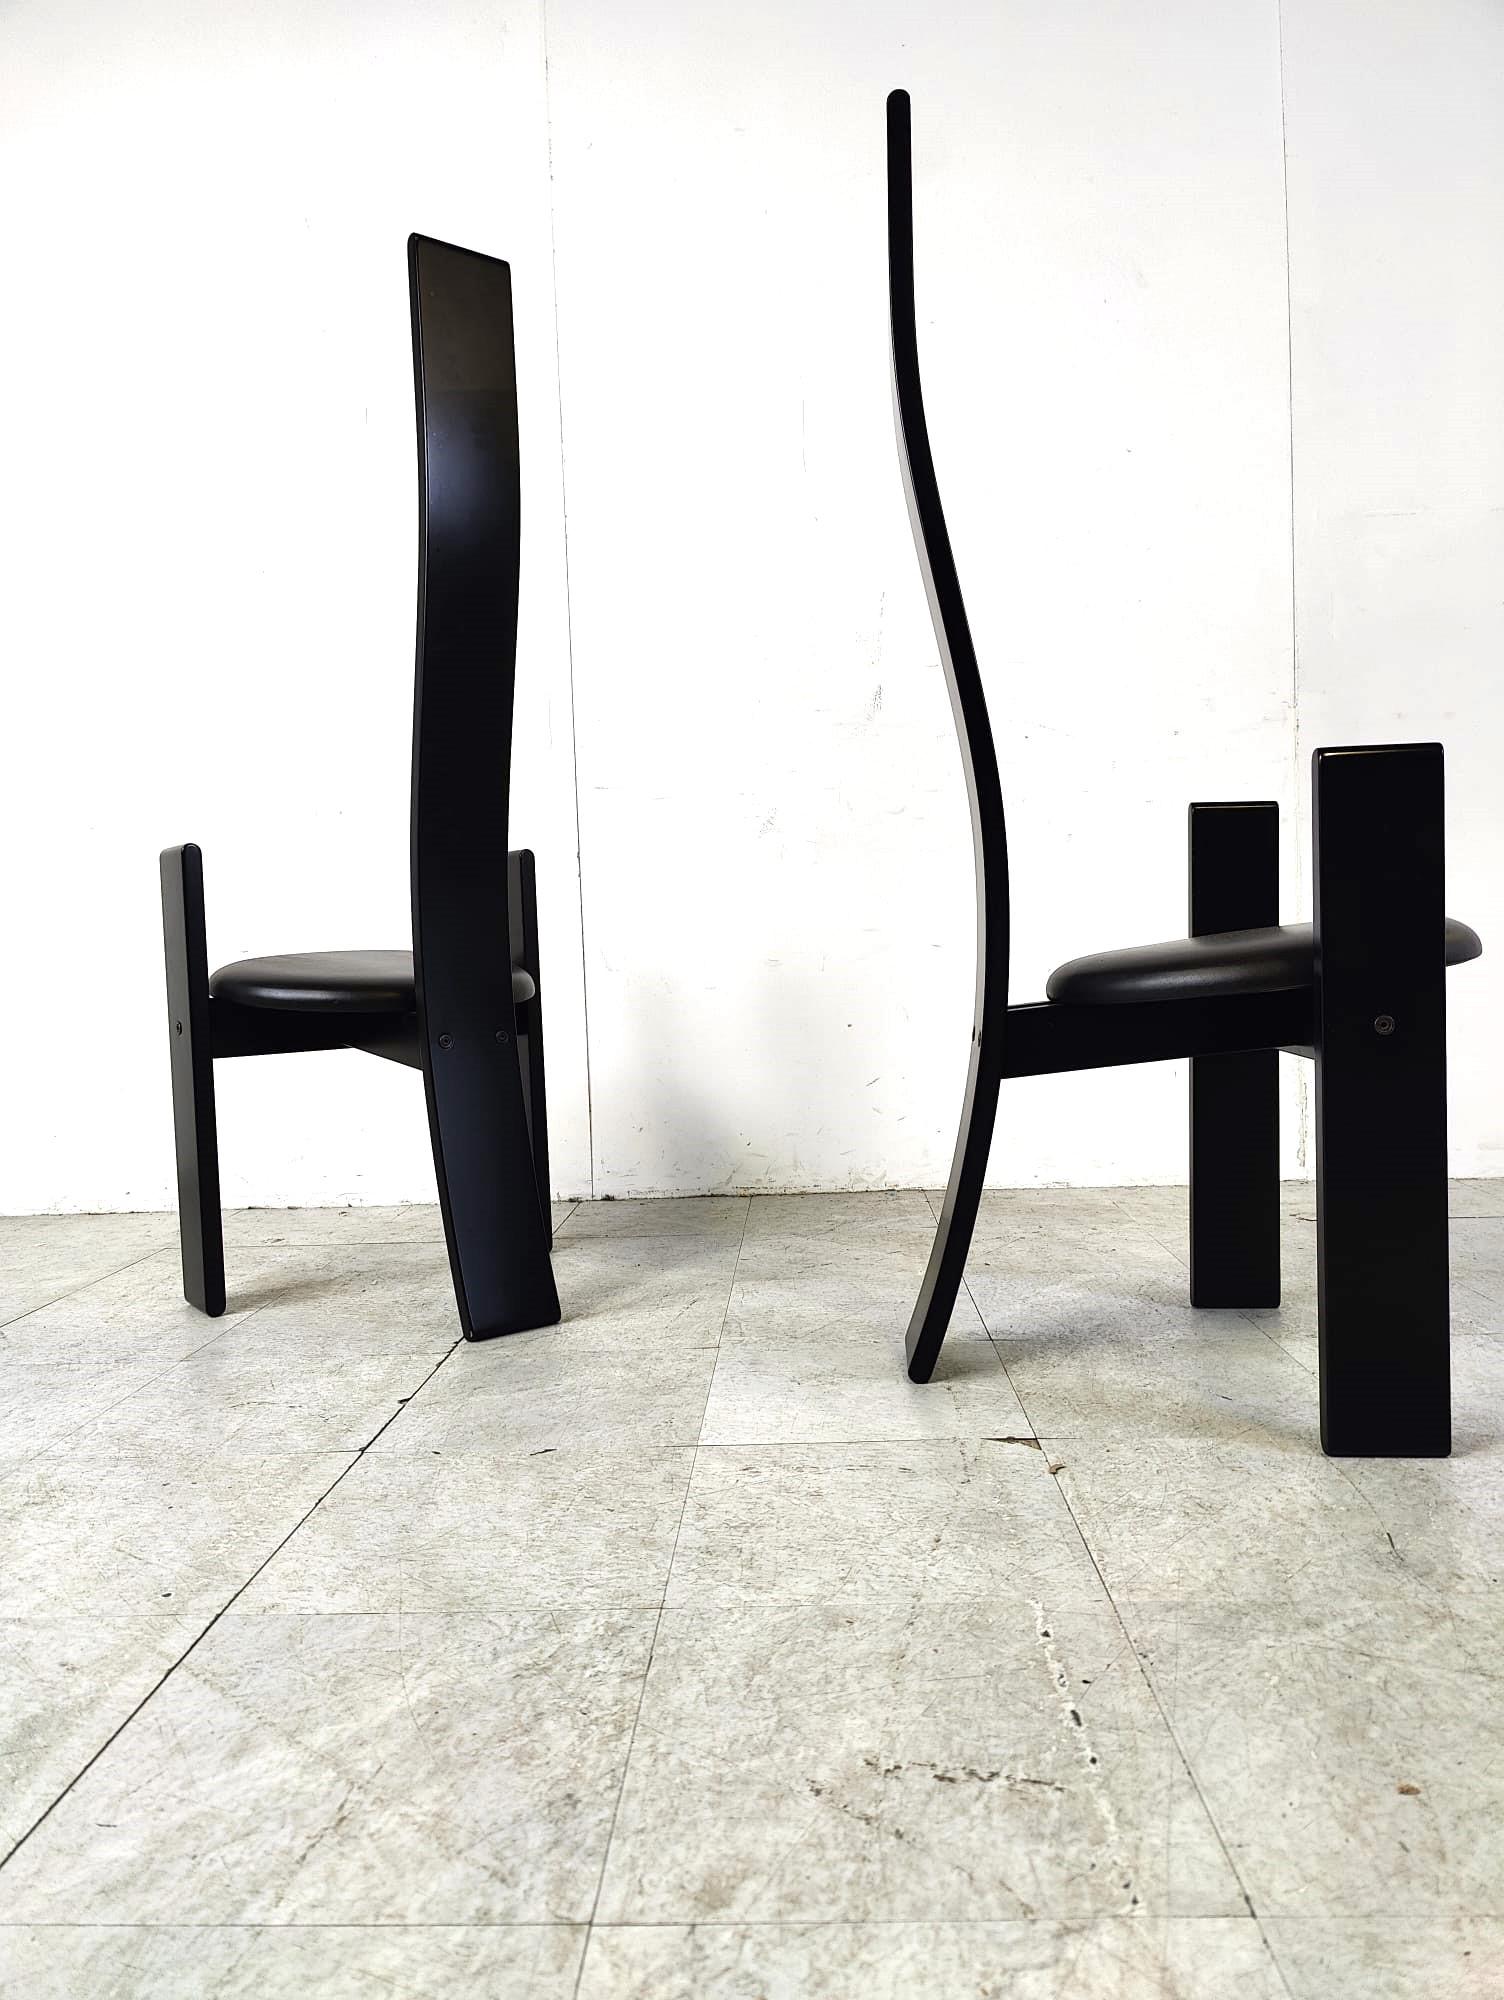 Set of 6 dining chairs model 'Golem' designed by Vico Magistretti voor Poggi.

The chairs are made of black lacquered wood and upholstered with black skai.

Beautiful slim and modern design.

Good condition, normal age related wear

The chair with